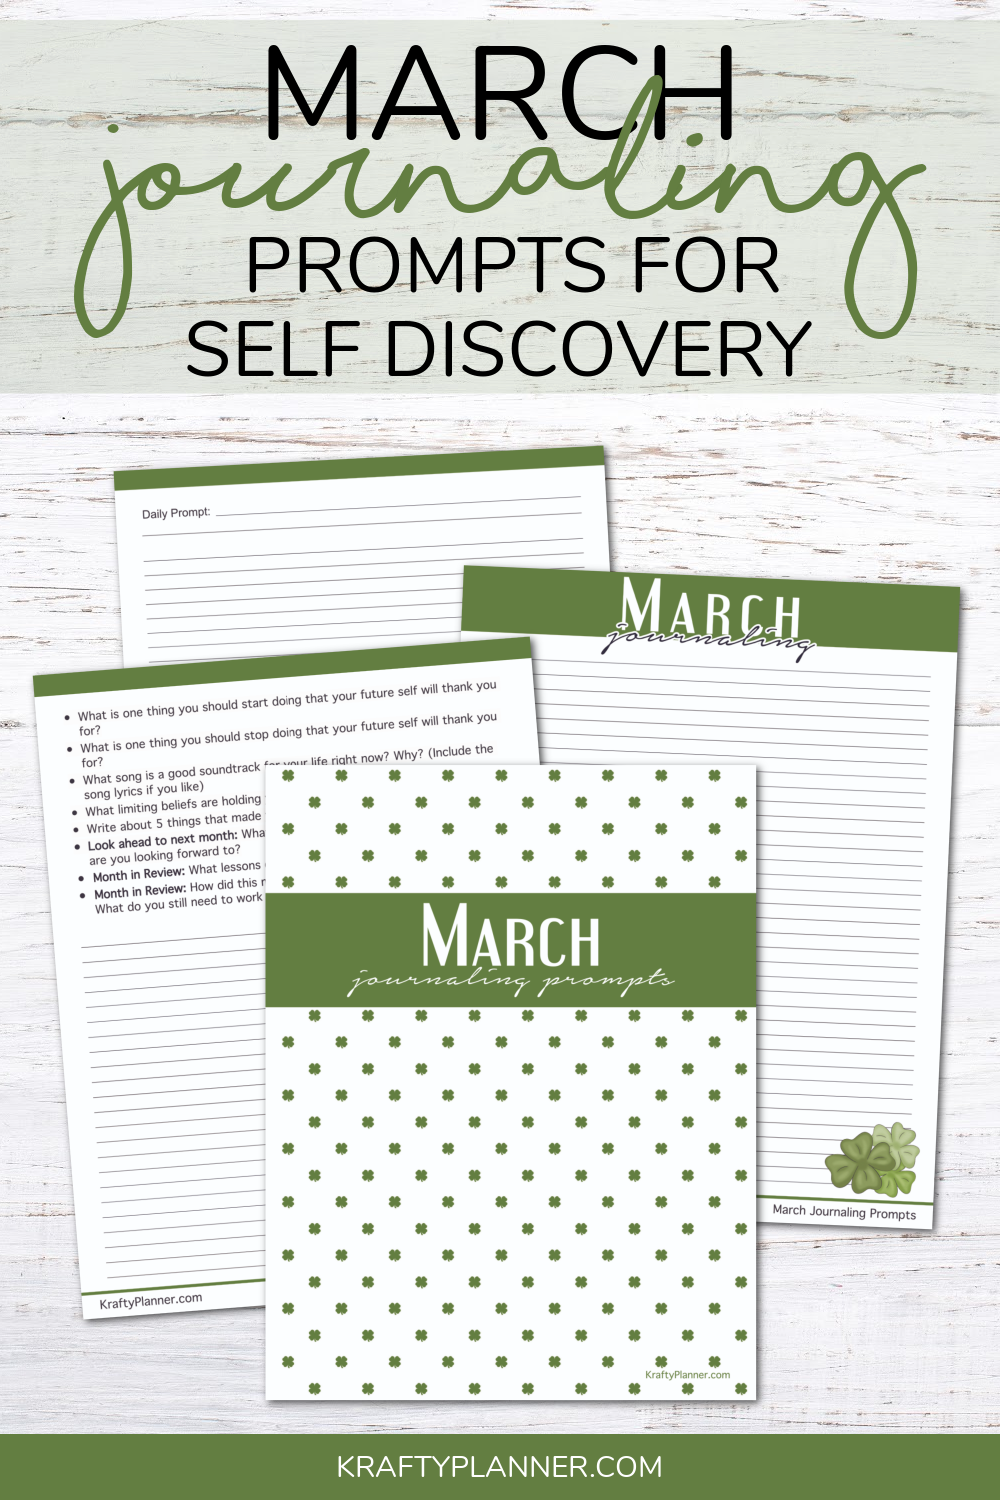 Self Discovery Journaling Prompts for March 2022 - the Krafty Planner